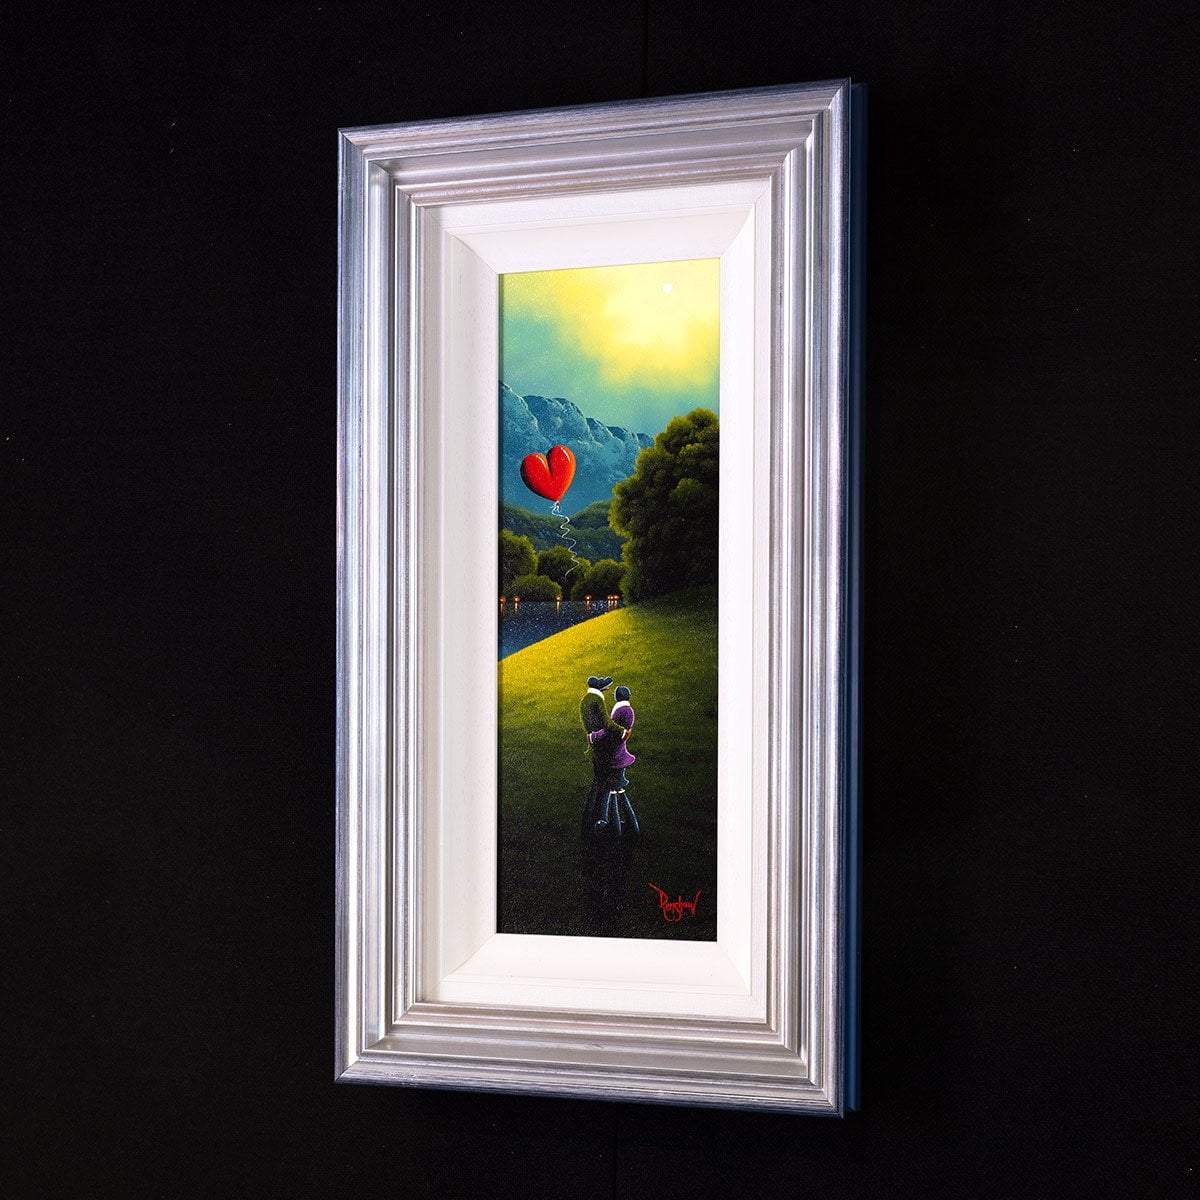 Lost in Your Love David Renshaw Framed